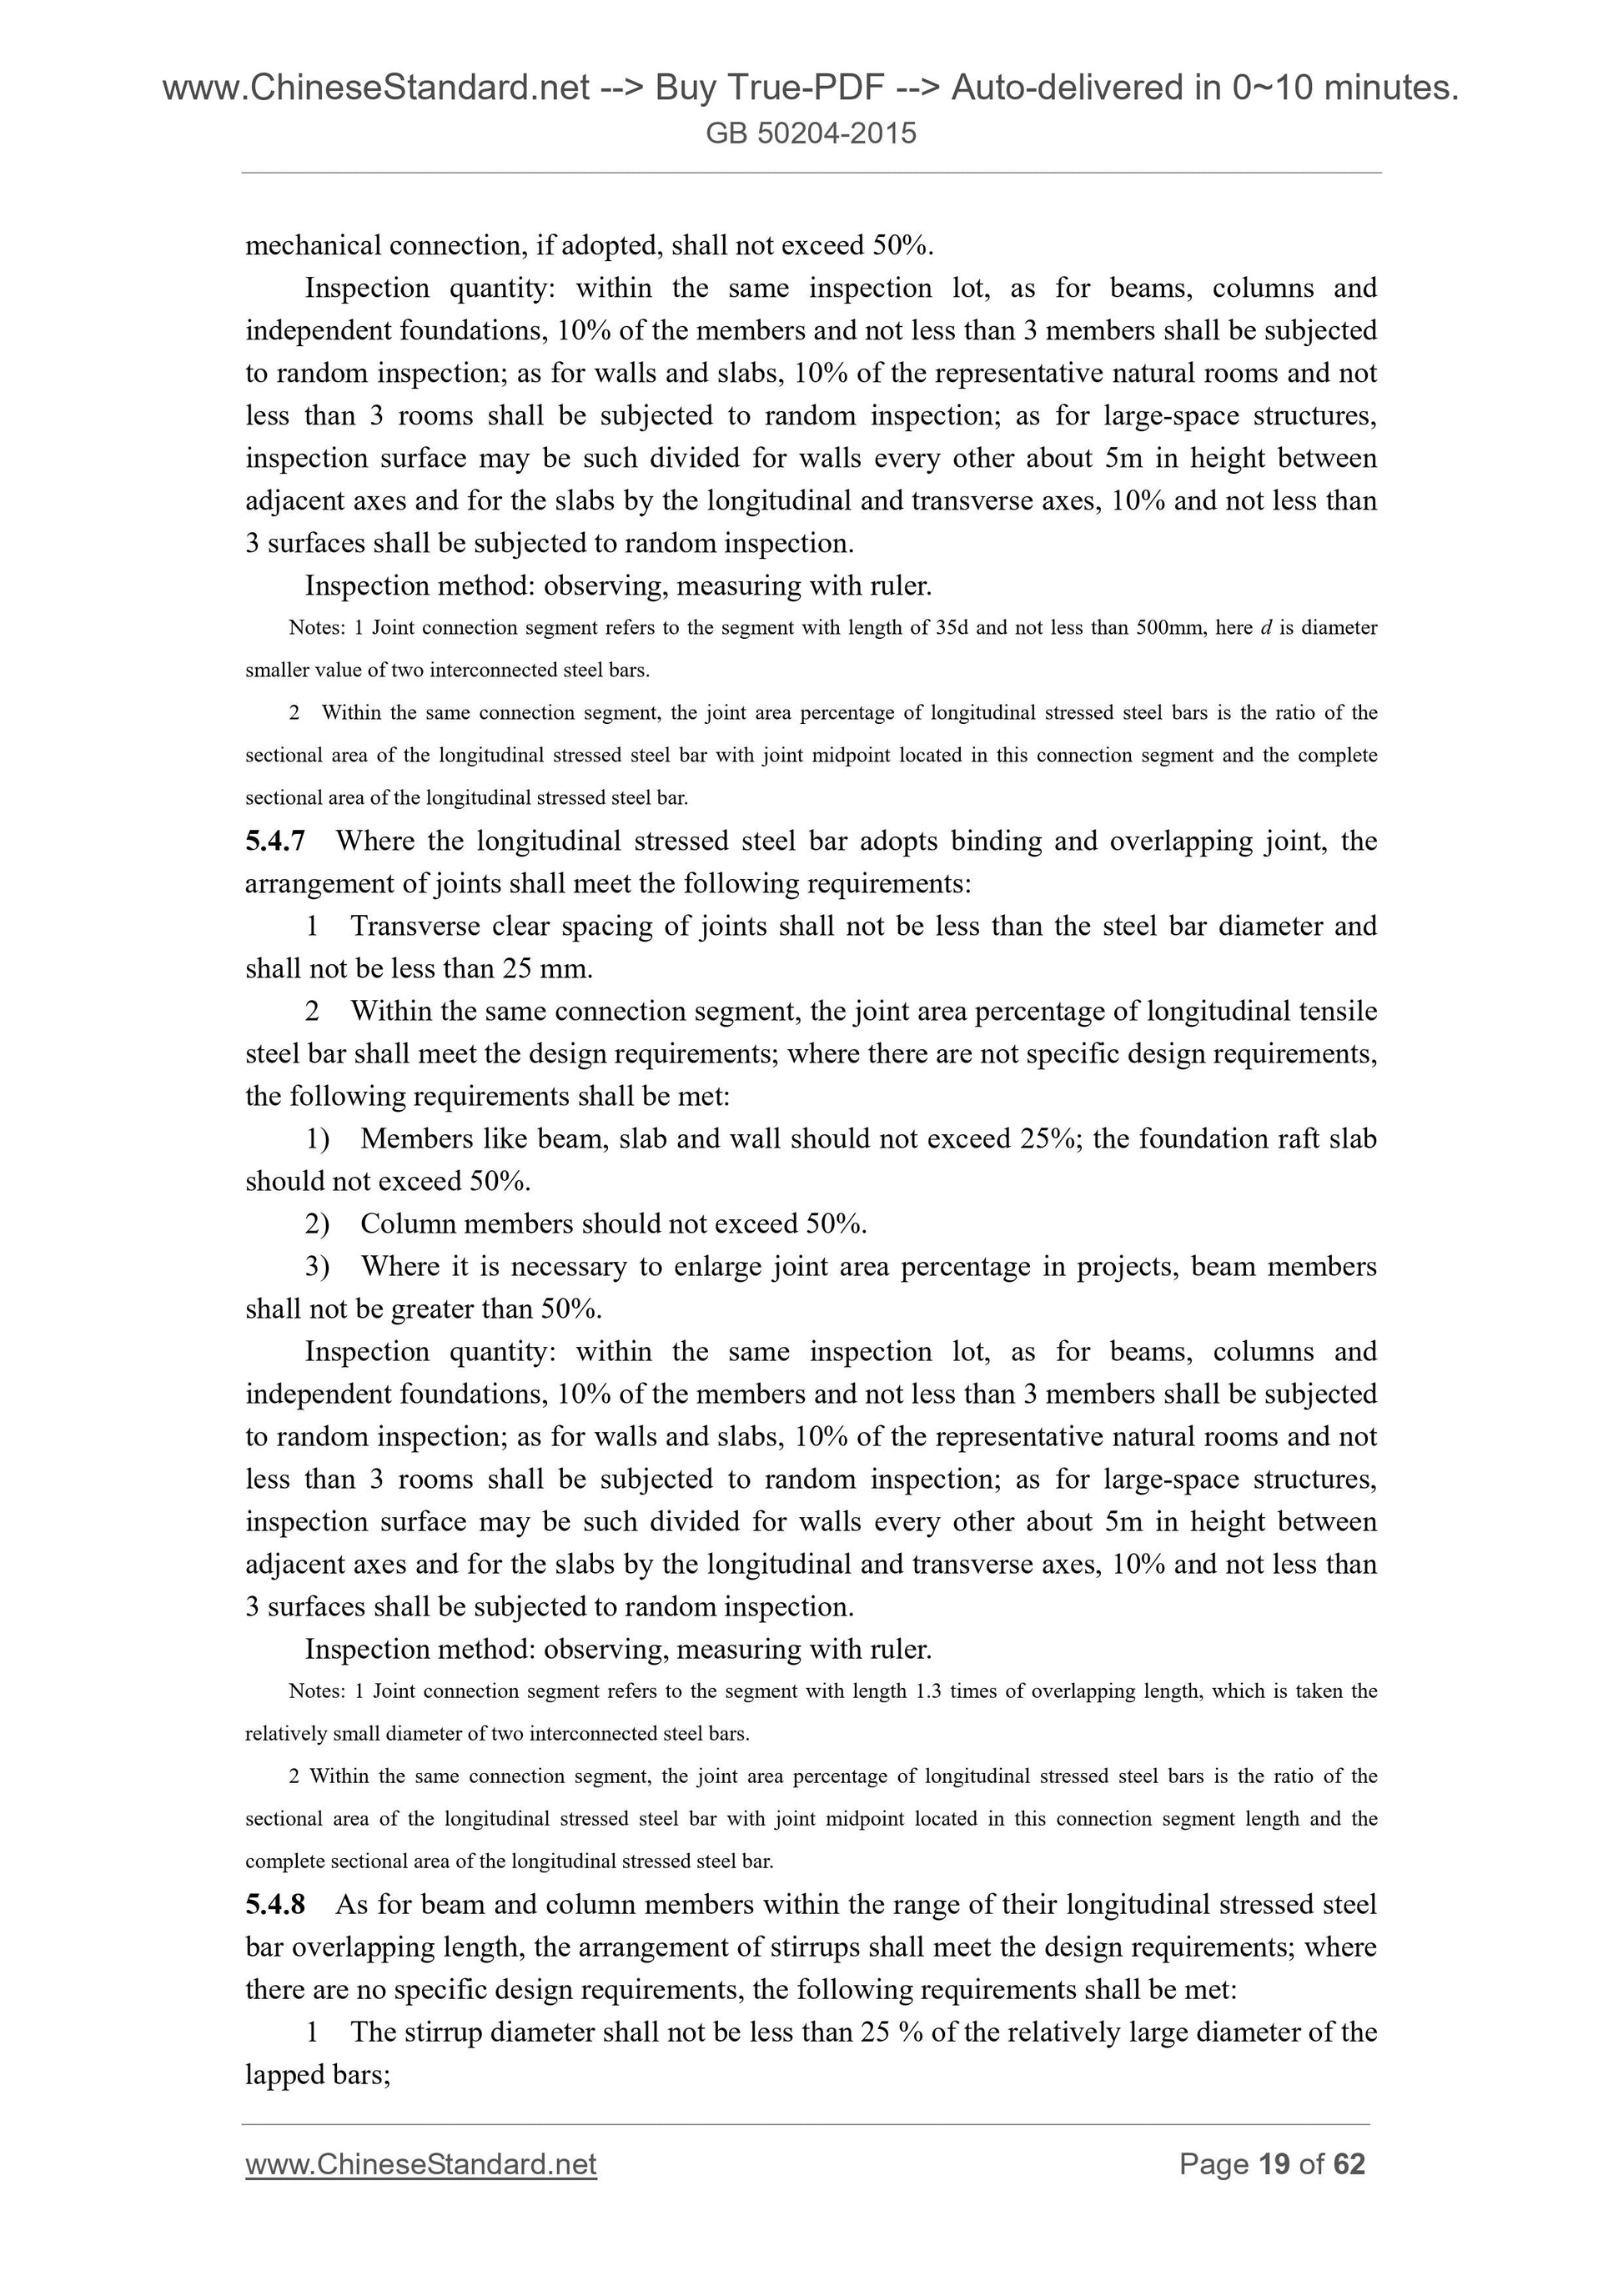 GB 50204-2015 Page 11